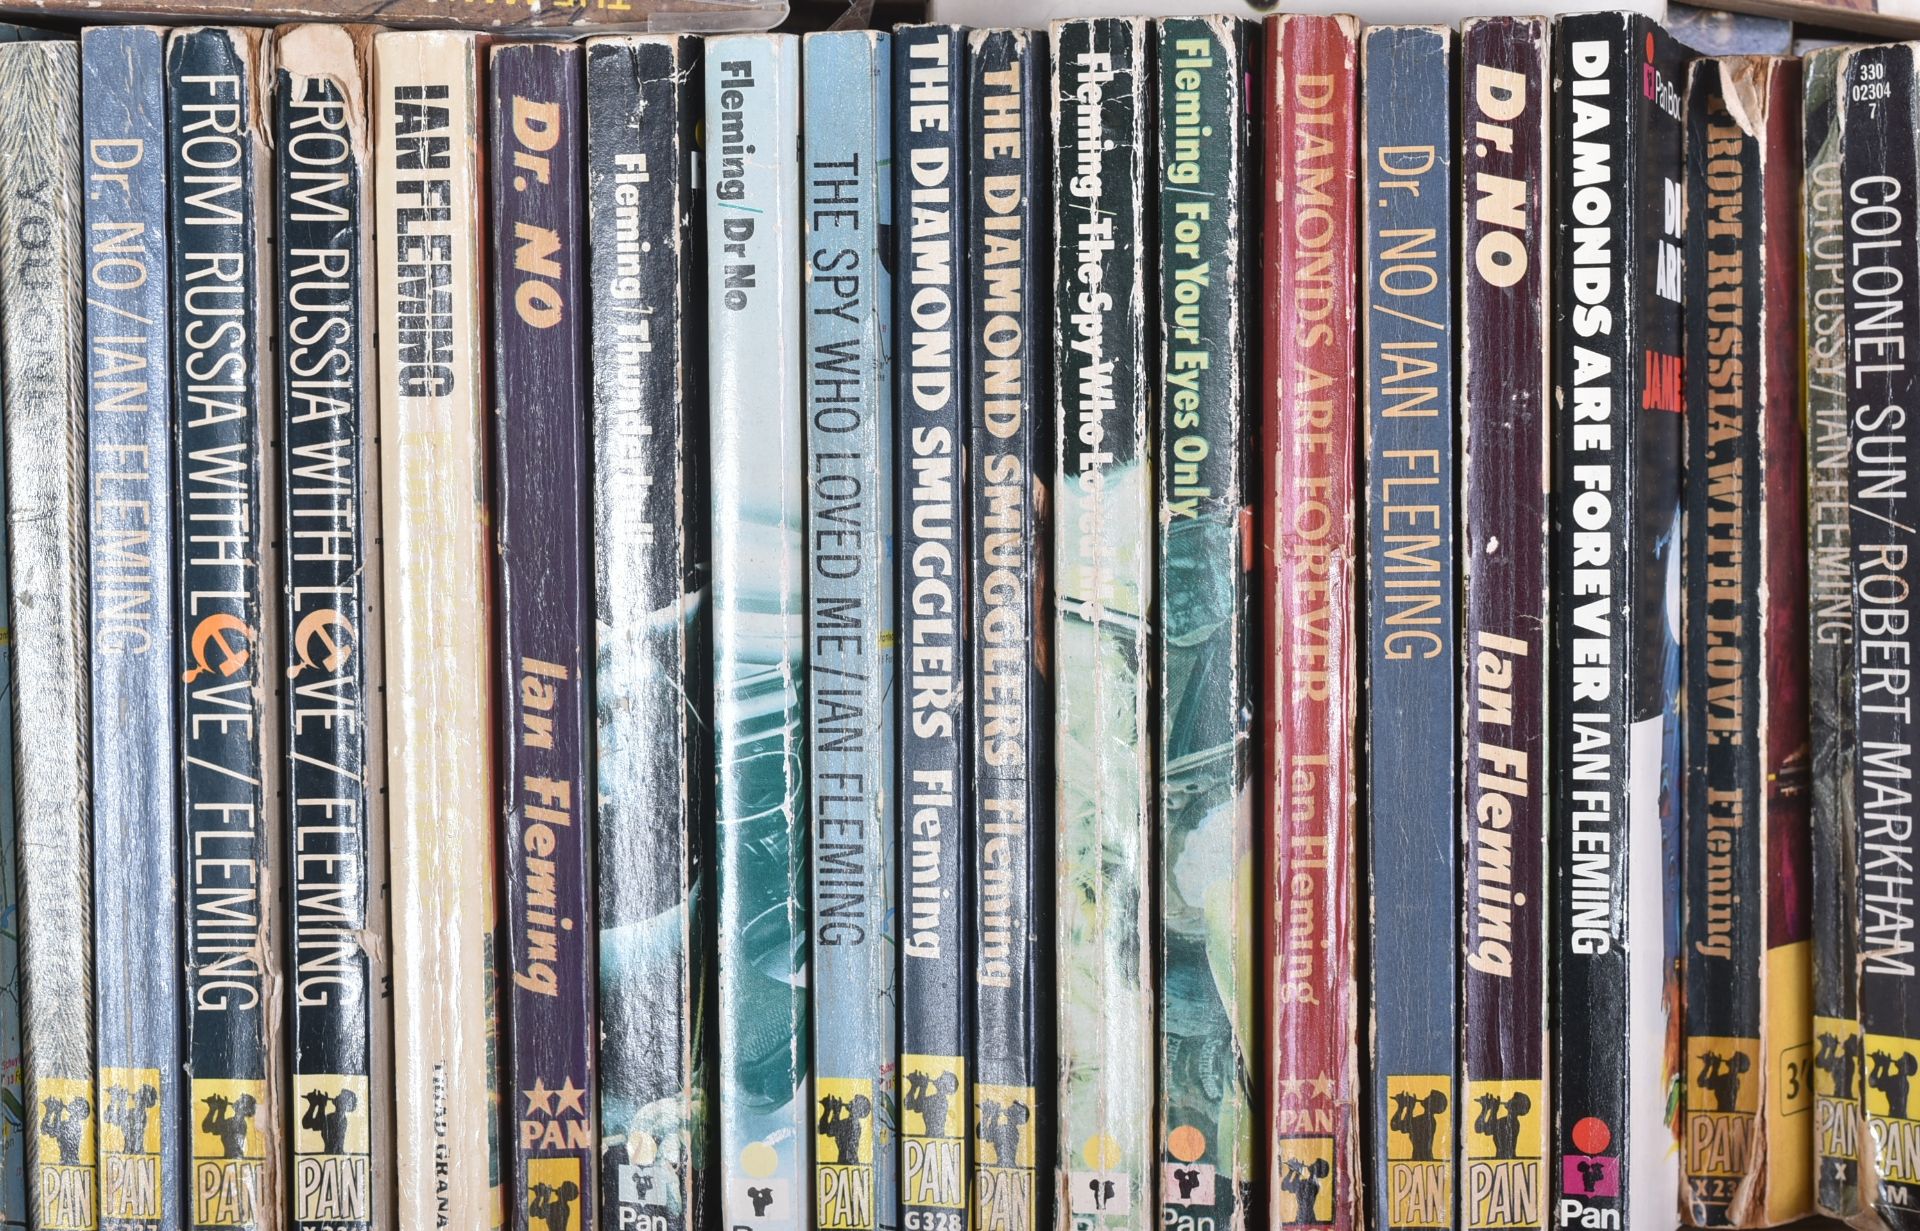 JAMES BOND - LARGE COLLECTION OF VINTAGE PAN BOOKS - Image 3 of 6